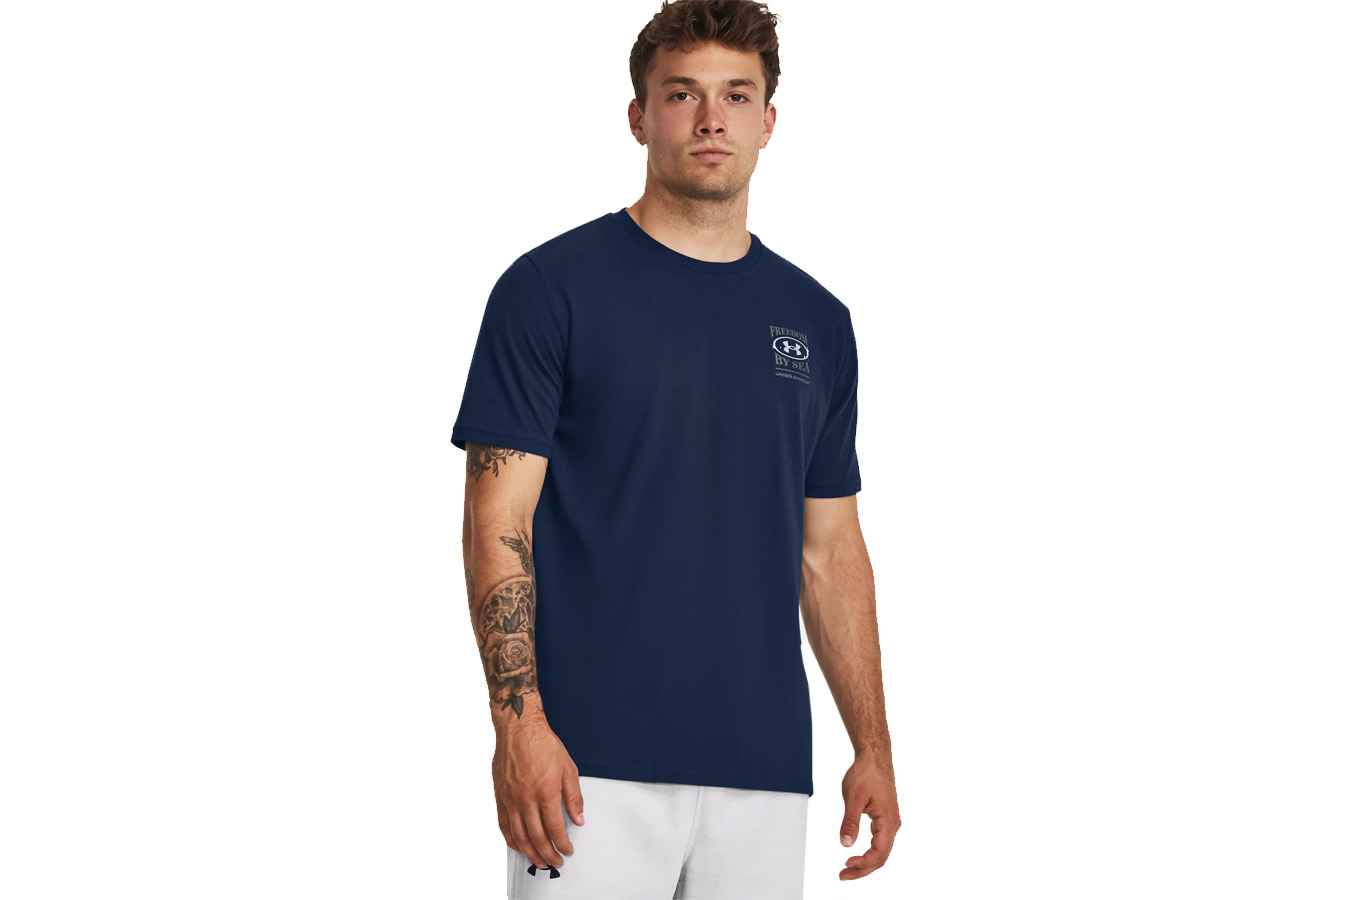  Under Armour 1373888 Men's UA Freedom By Sea T-Shirt - Blackout  Navy - Small : Clothing, Shoes & Jewelry